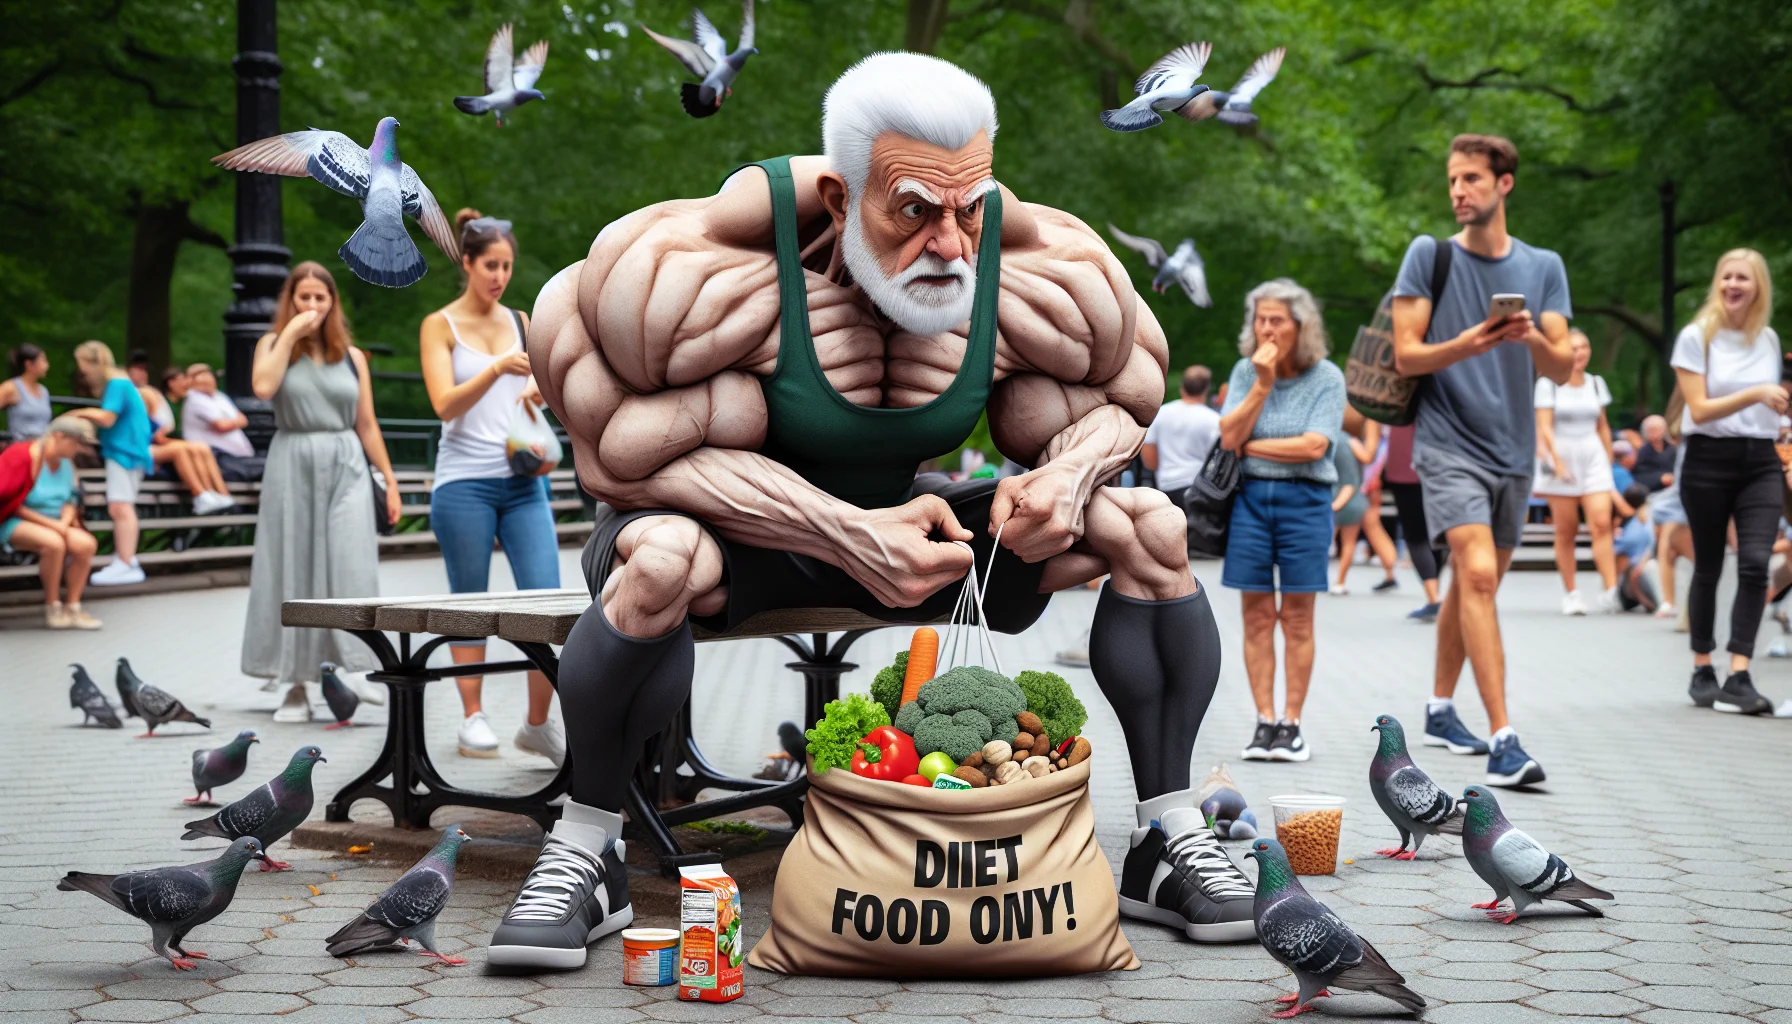 Create a humorous image of a robust older man, matched in physique to a martial art expert, focusing on healthy aging. This funny scenario happens in a public park where he's seen enthusiastically crunching on vegetables instead of the usual park food, fending off pigeons and squirrels, even maintaining perfect balance while doing so. He carries a bag marked 'Diet Food Only'. People around him, of various ages and races, are watching him with admiration and humor, their own bags of unhealthy food forgotten.